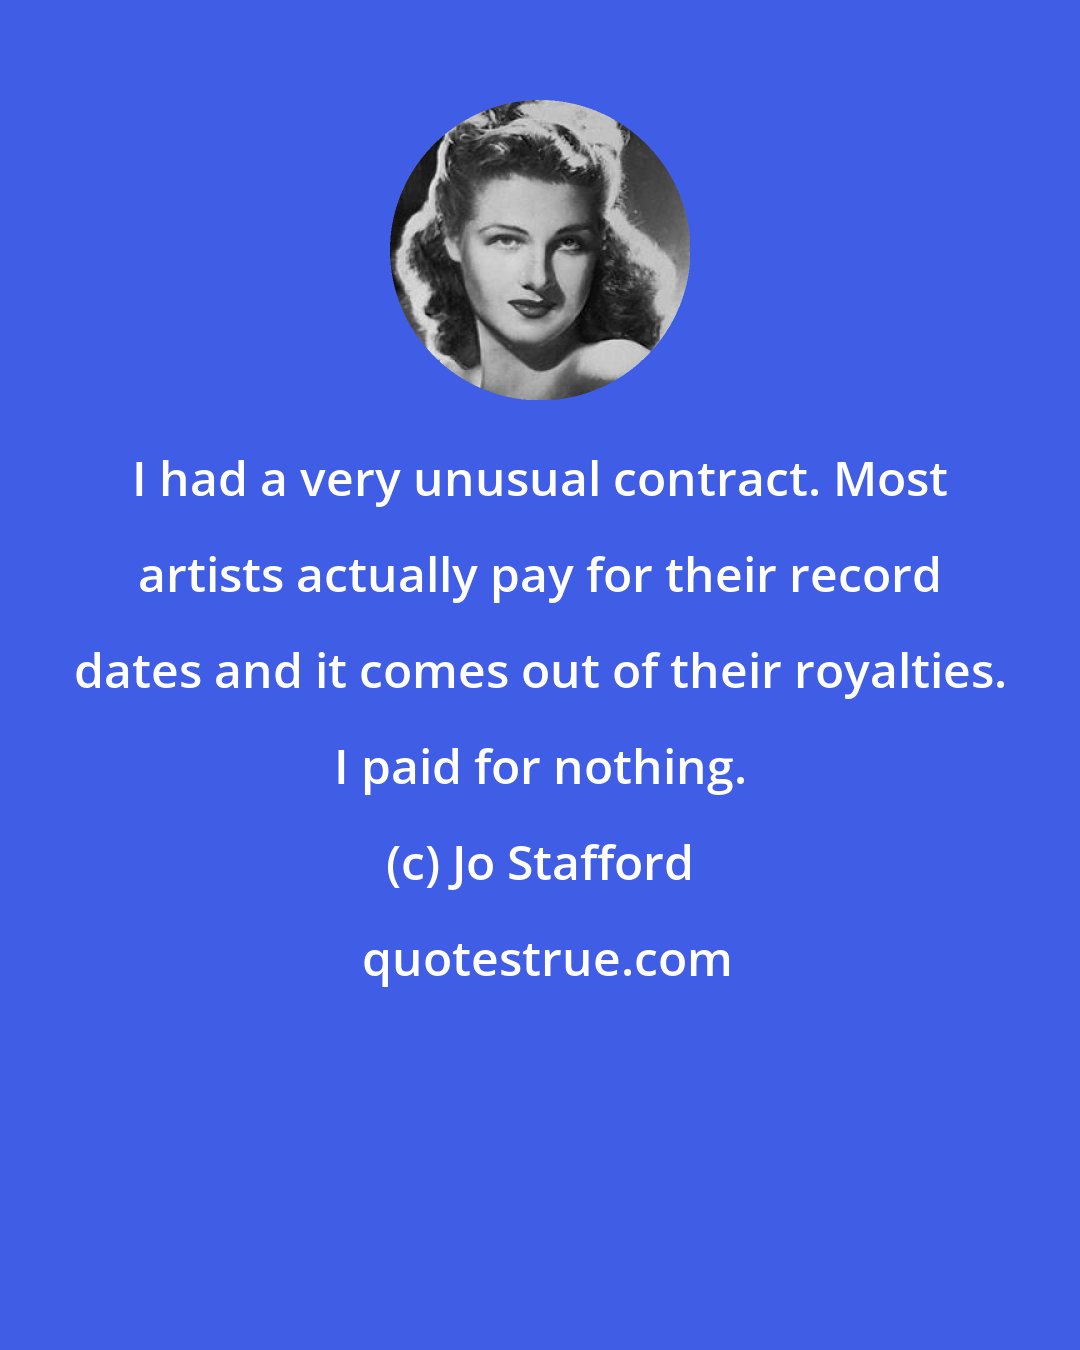 Jo Stafford: I had a very unusual contract. Most artists actually pay for their record dates and it comes out of their royalties. I paid for nothing.